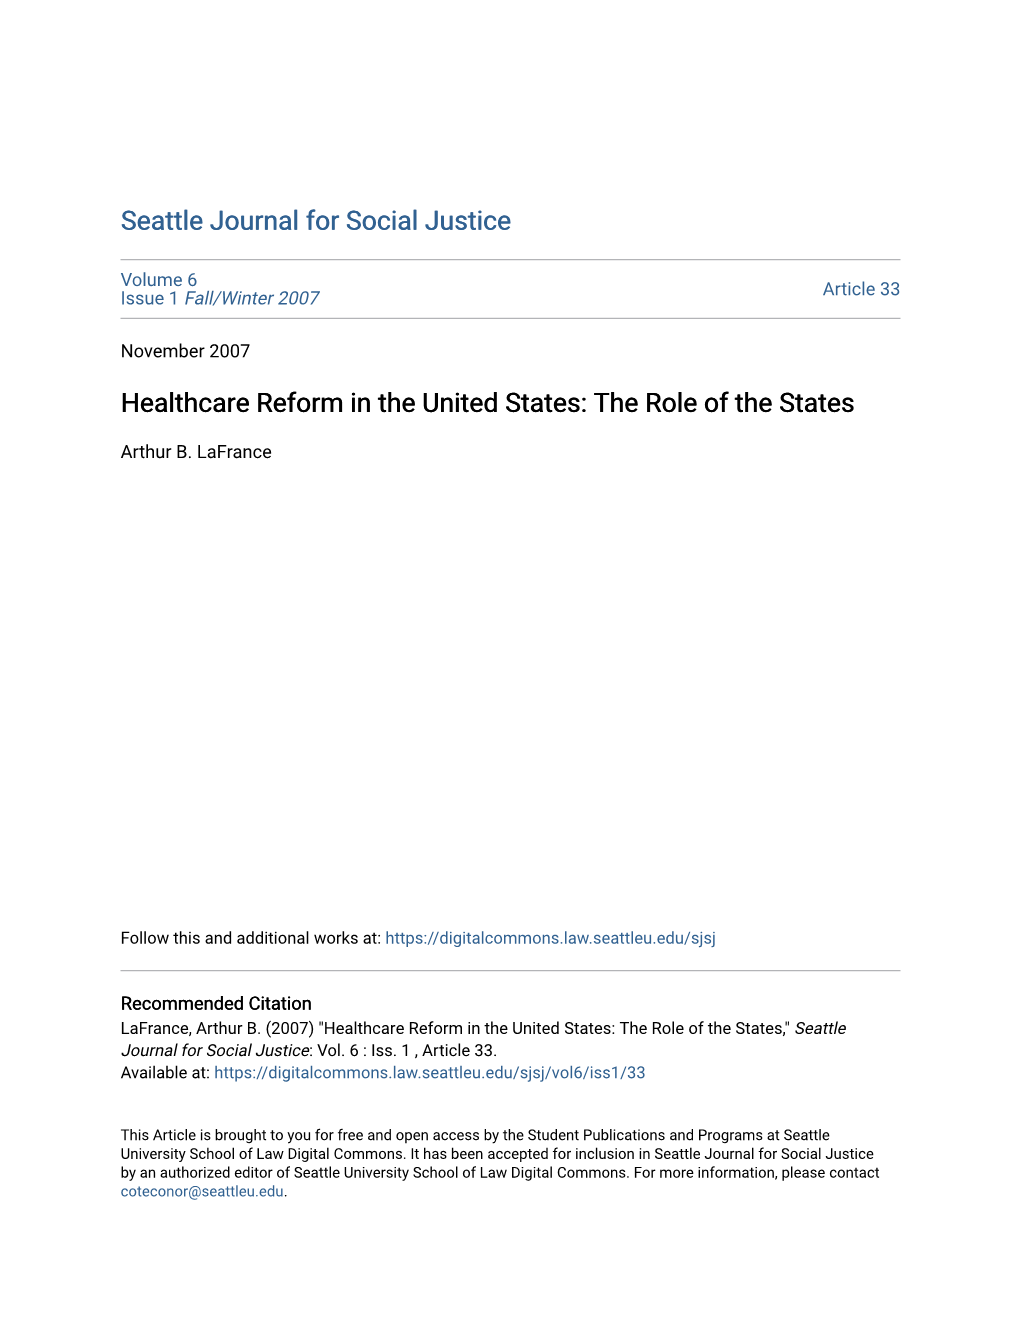 Healthcare Reform in the United States: the Role of the States